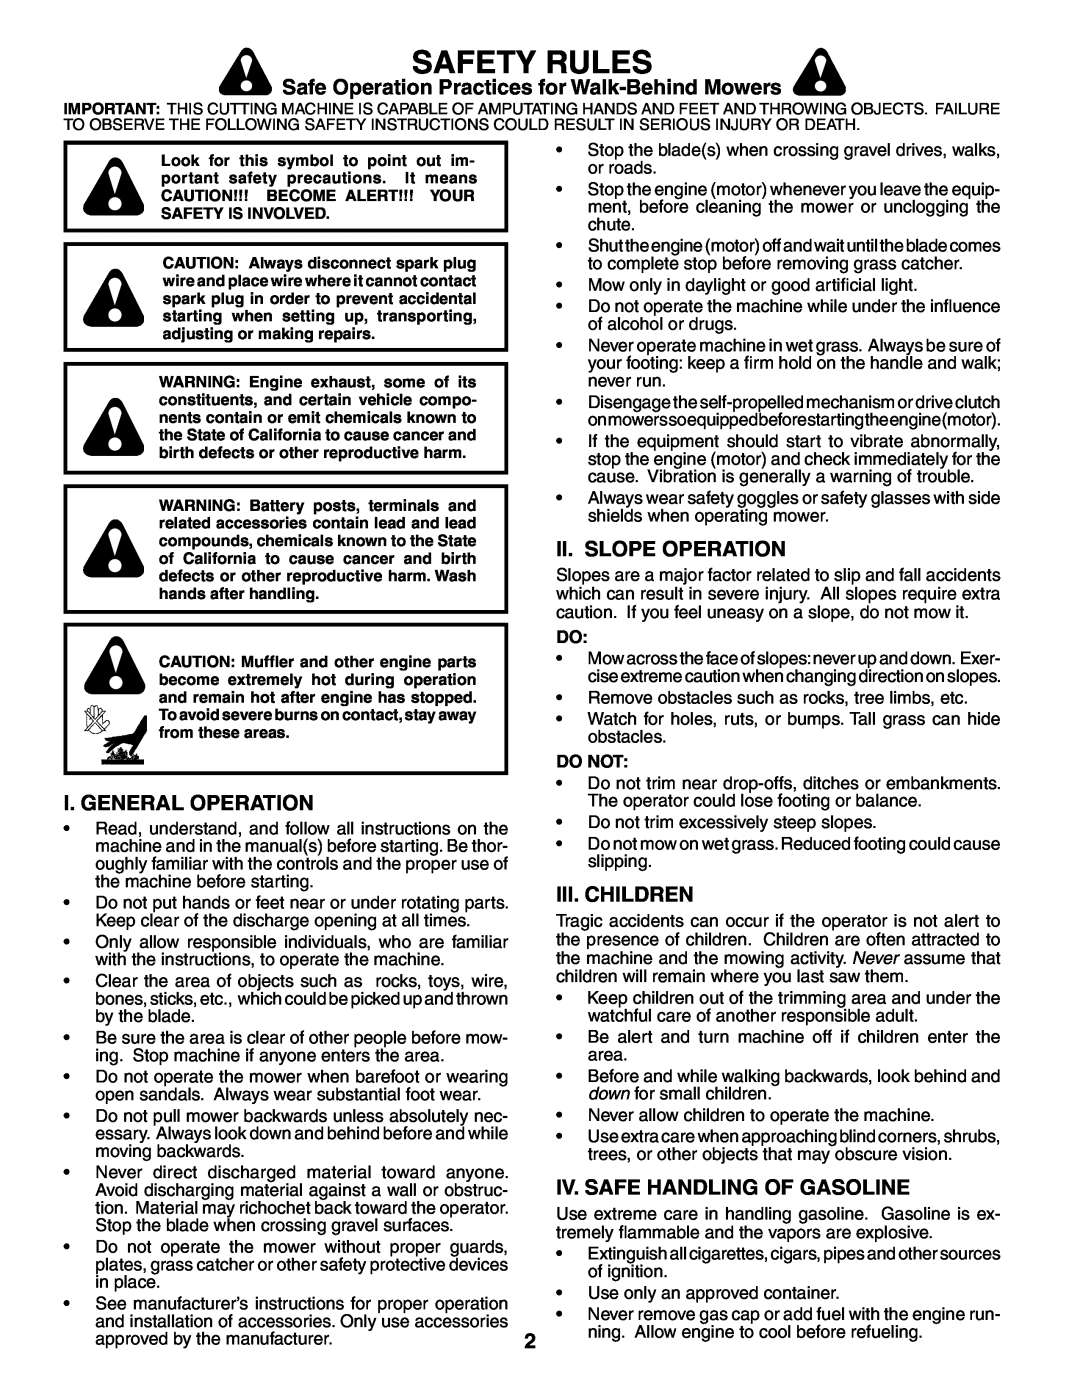 Husqvarna 917.37594 Safety Rules, Safe Operation Practices for Walk-Behind Mowers, Ii. Slope Operation, Iii. Children 